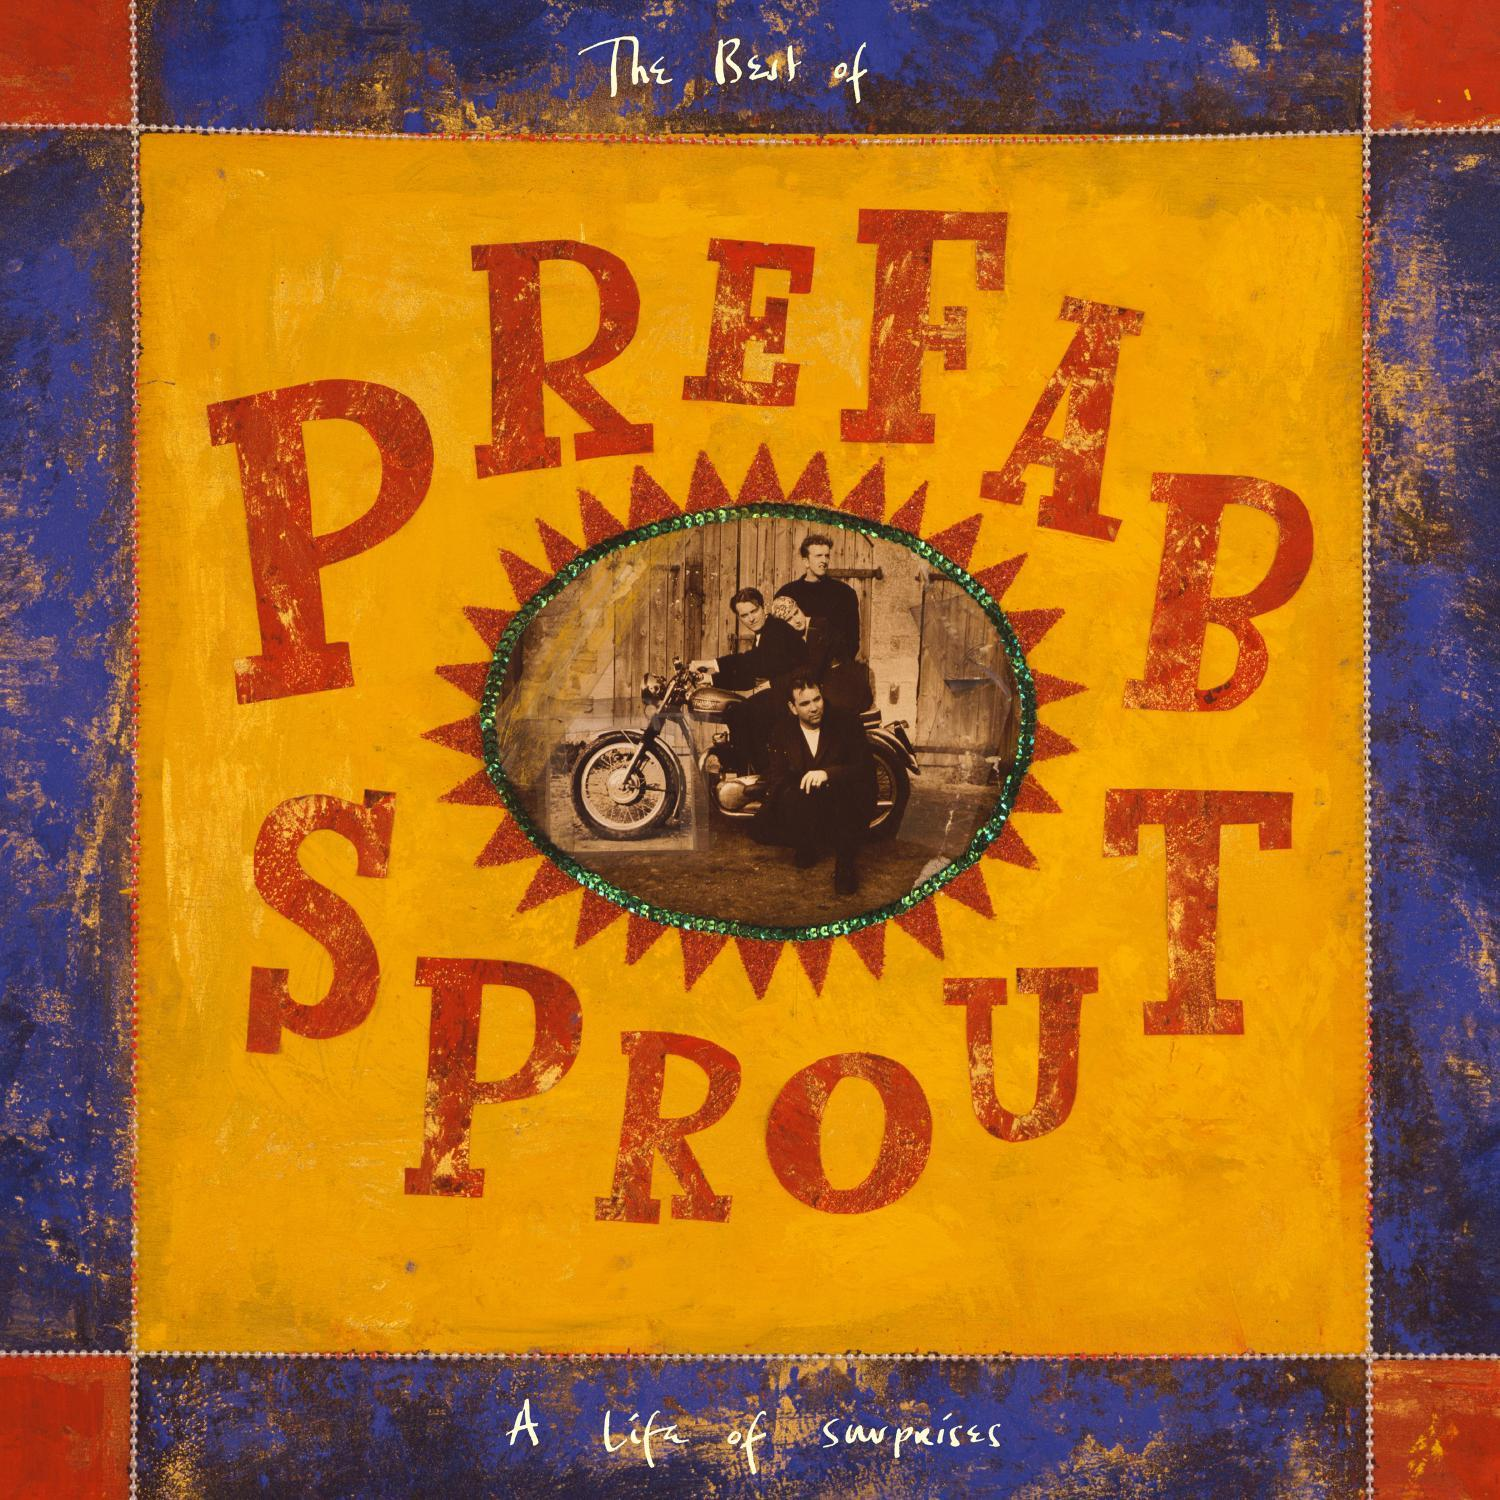 - - A of (Vinyl) (Remastered) Sprout Surprises Life Prefab